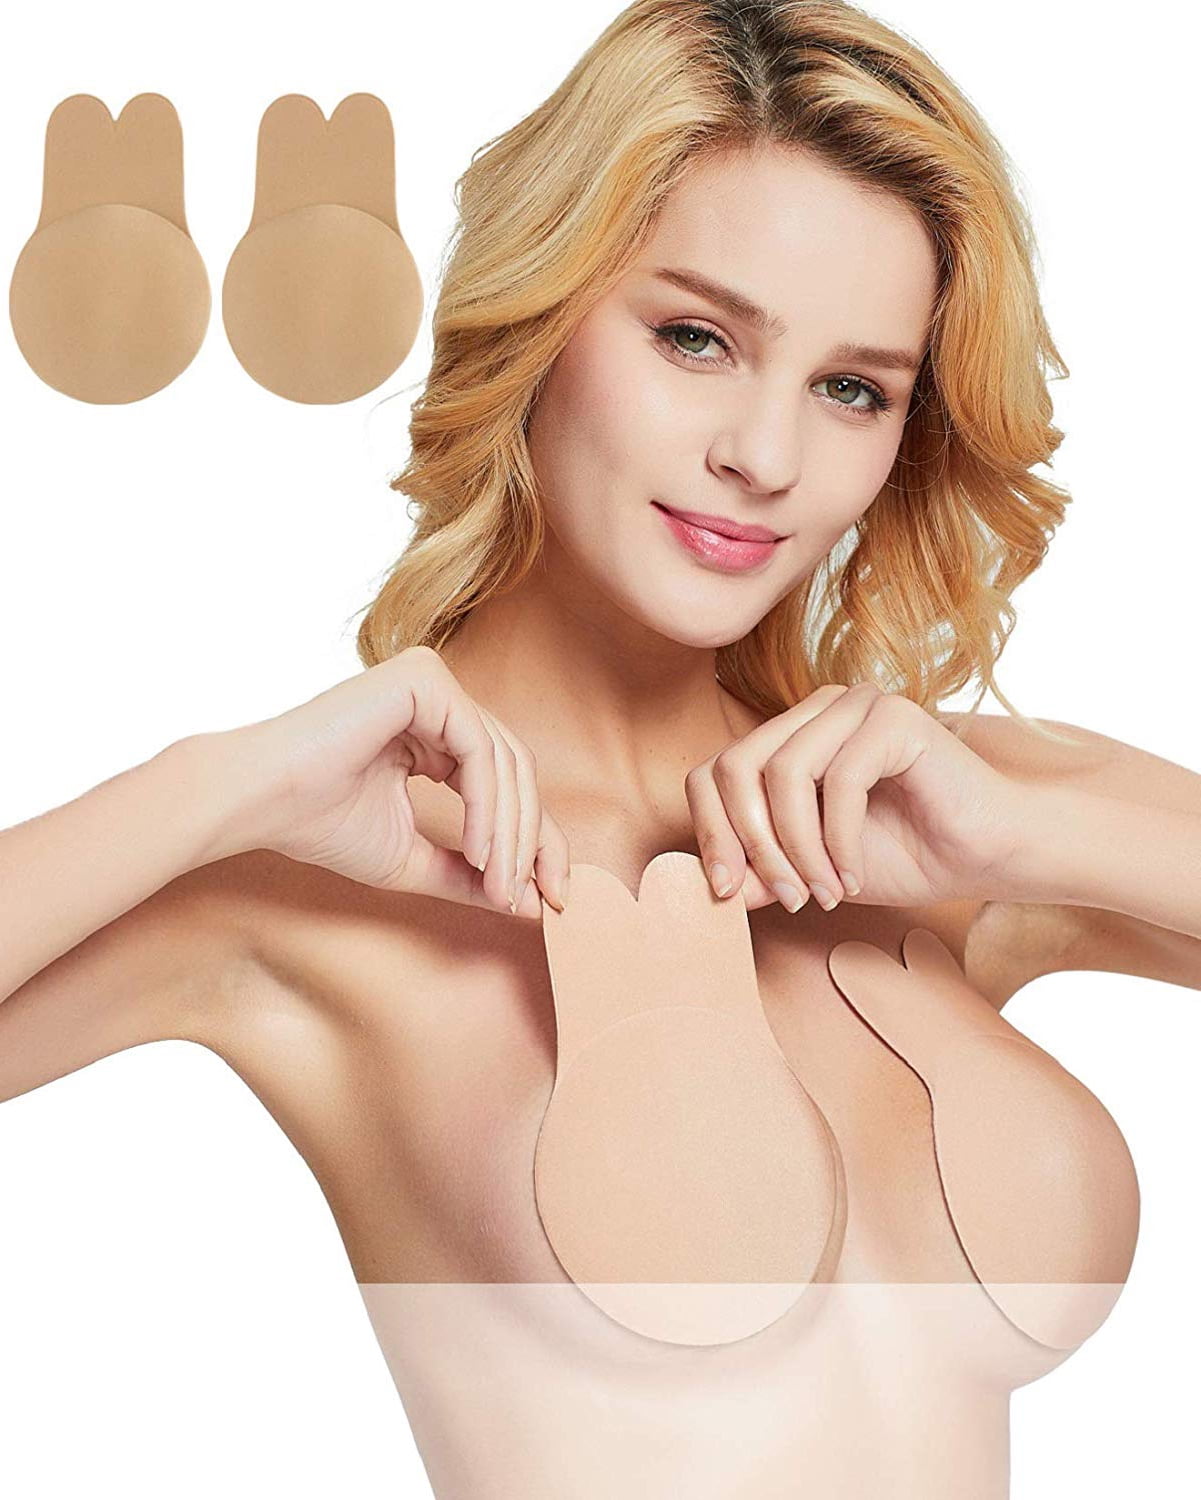 Stick On Bra Backless Bra Reusable Sticky Push Up Bra Invisible Lift Up Bra Silicone Adhesive Lift Bra Self-Adhesive Bras Breast Lift Petal Freedom Bra Nipple Covers for Women Invisible Bra Nude